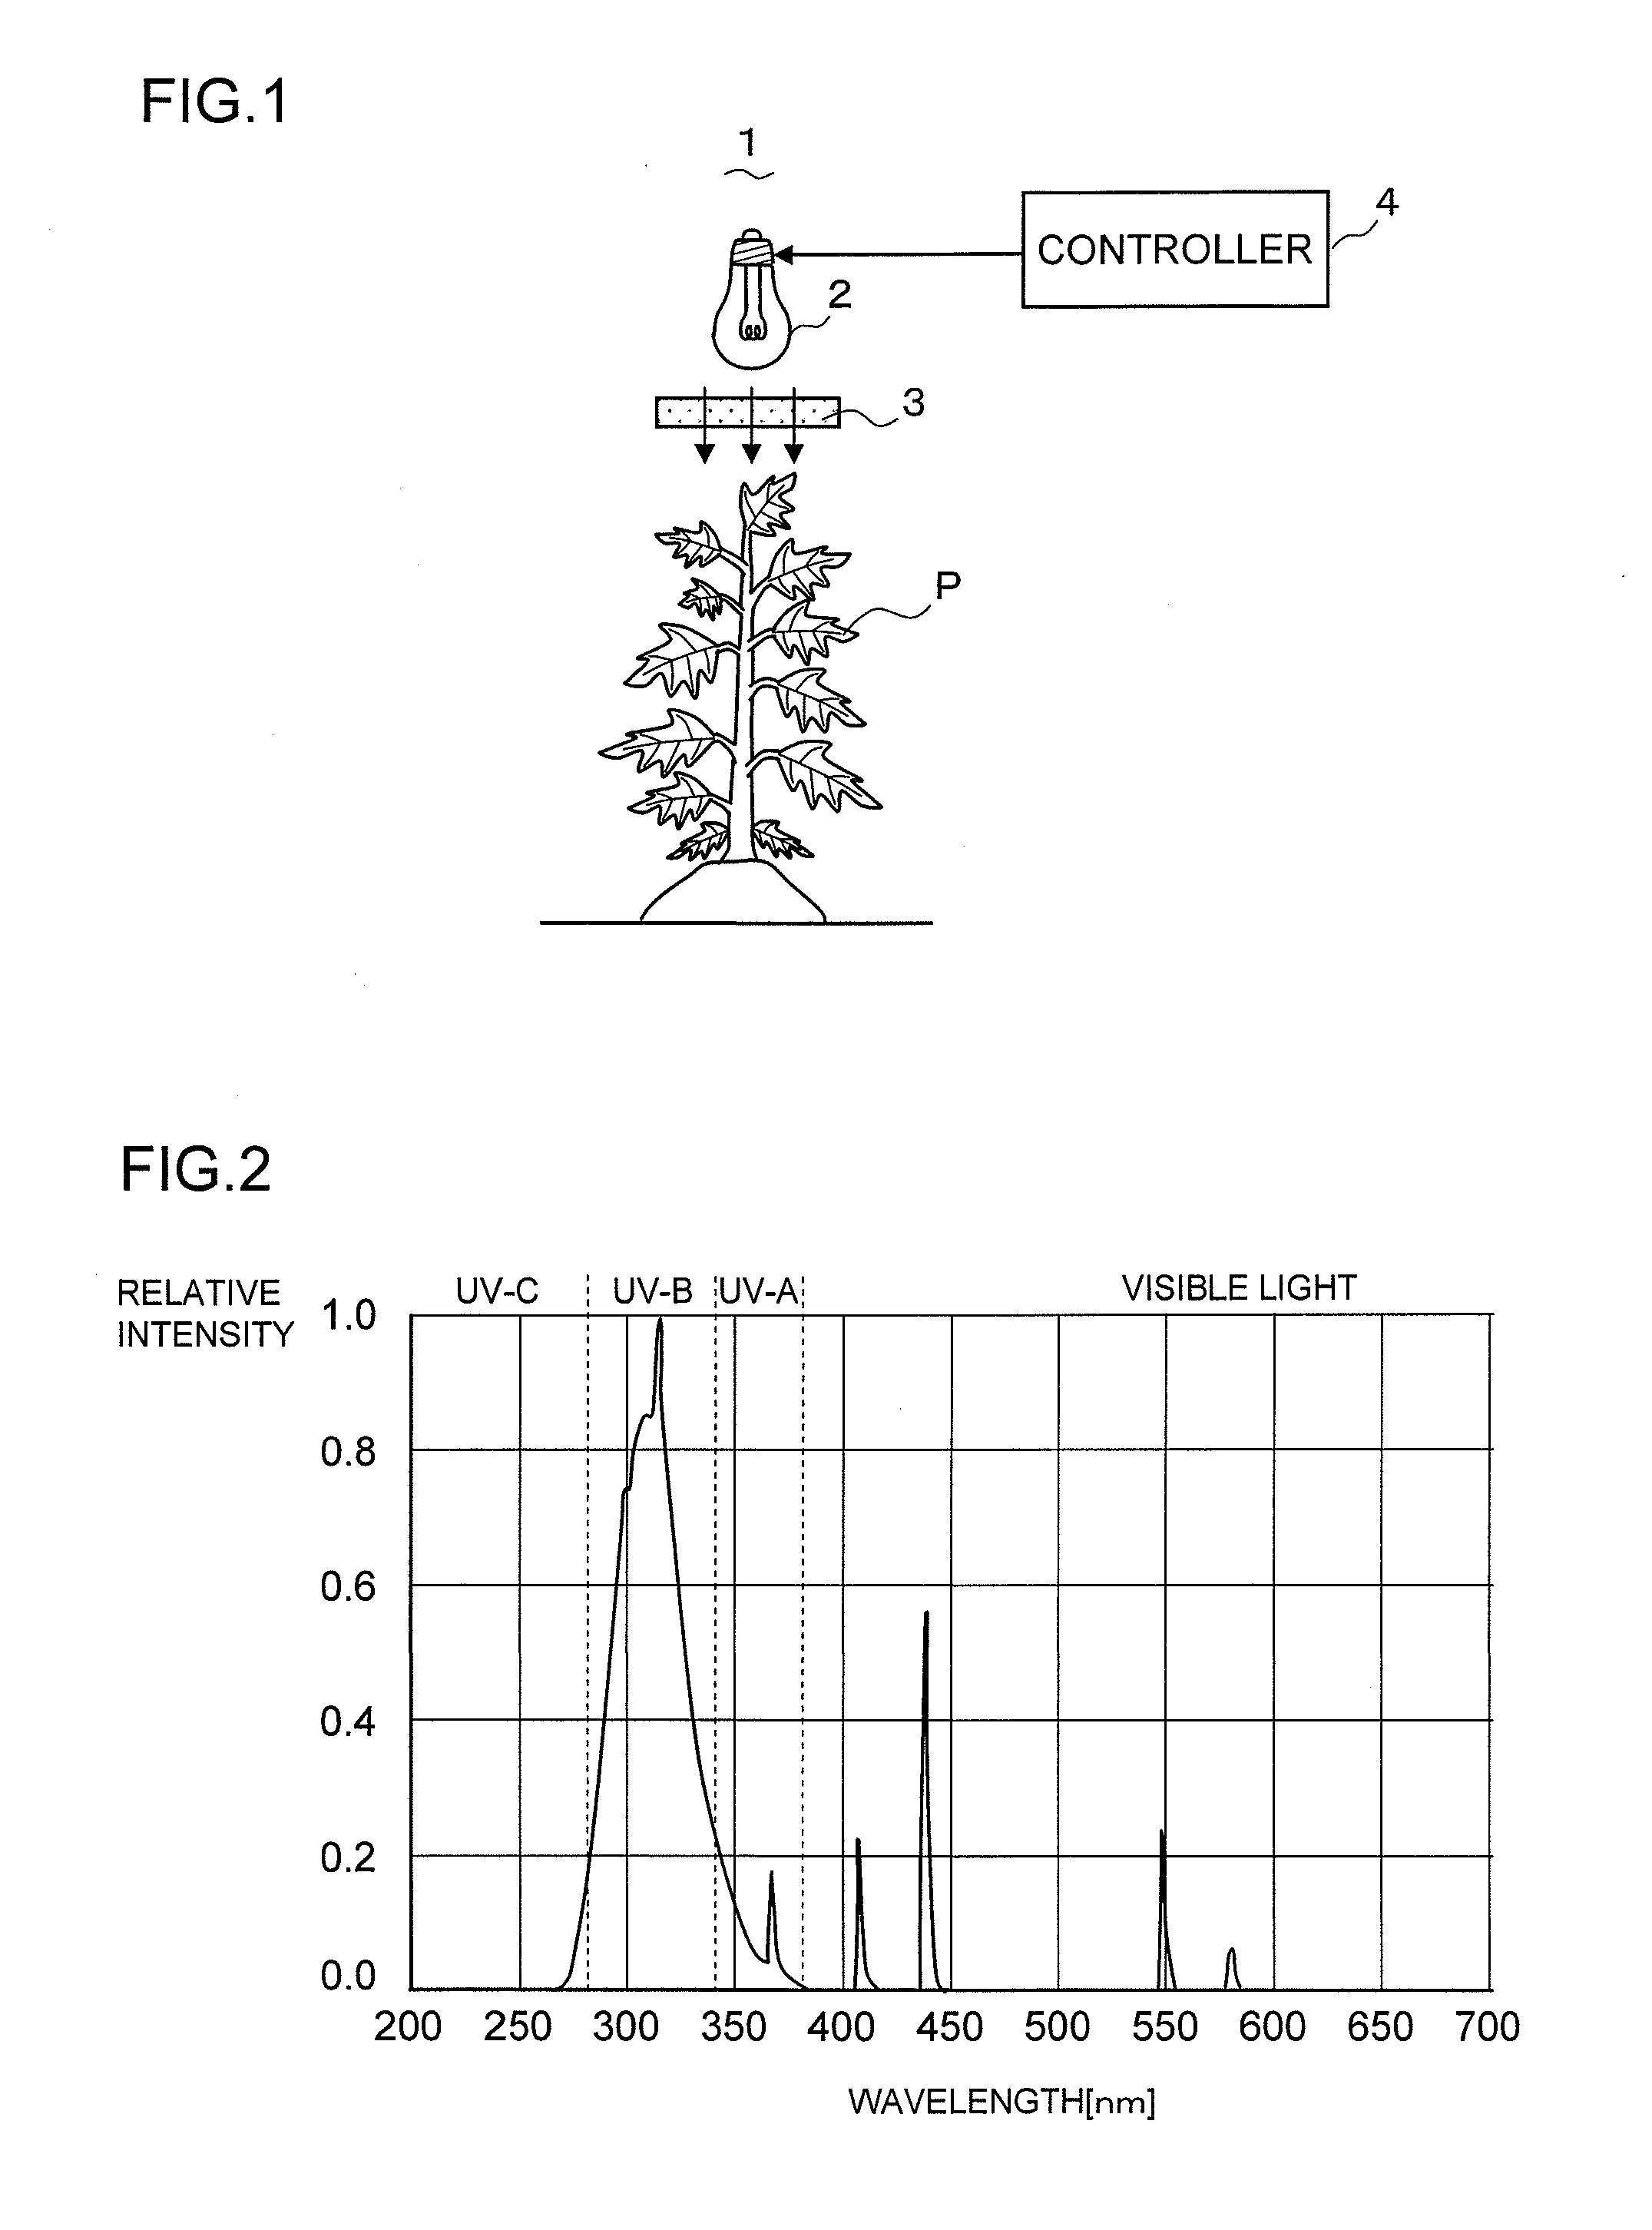 Lighting apparatus for controlling plant disease